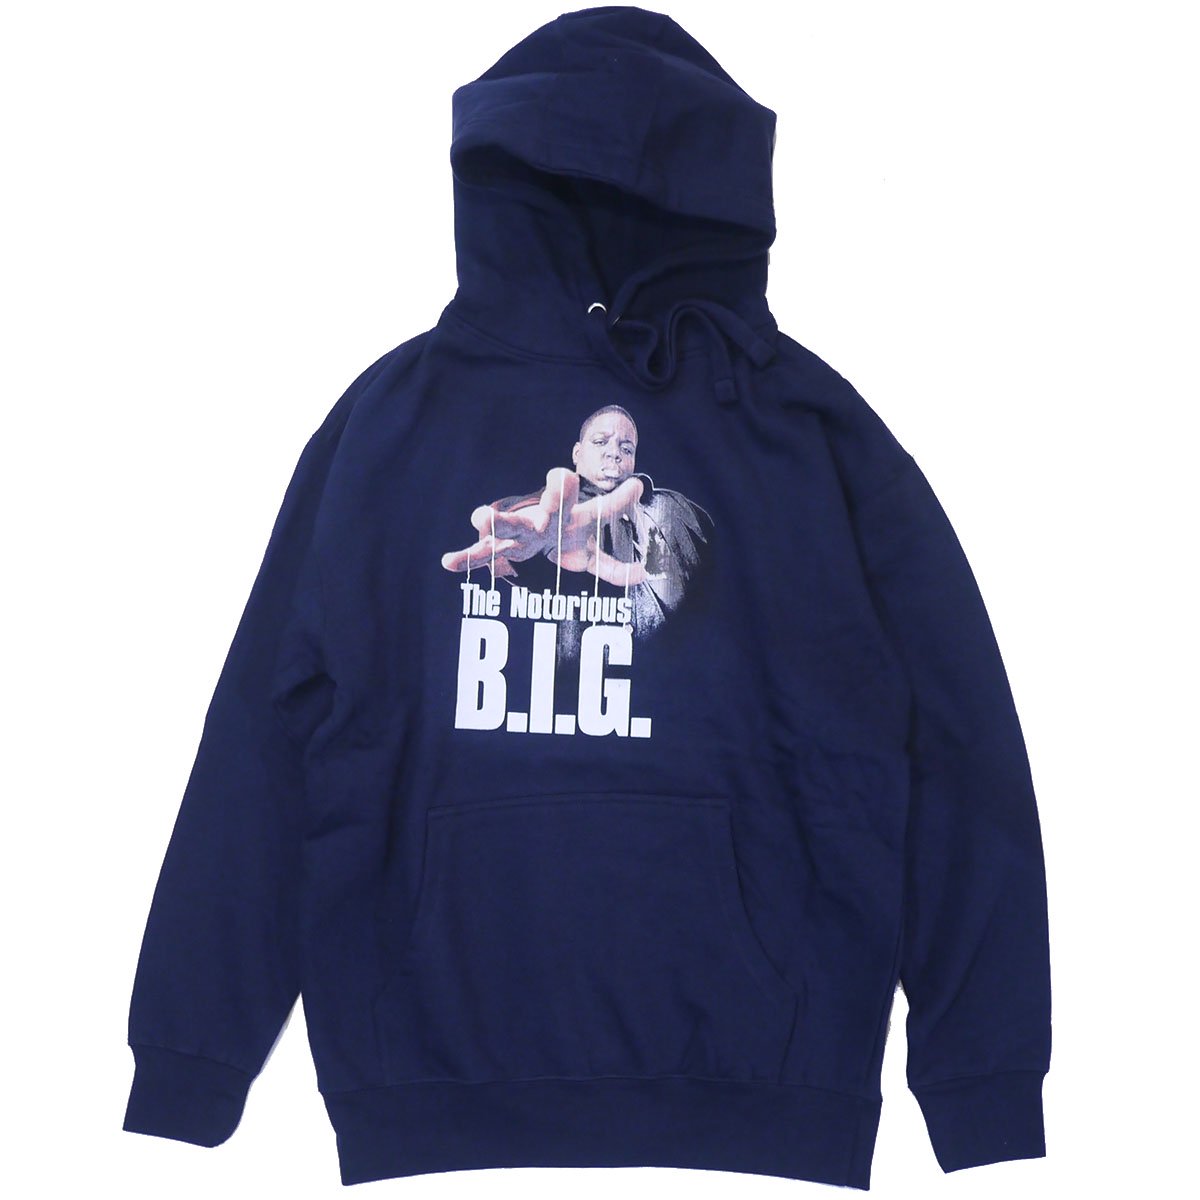 Fedup | HIPHOP WEAR | <img class='new_mark_img1' src='https://img.shop-pro.jp/img/new/icons6.gif' style='border:none;display:inline;margin:0px;padding:0px;width:auto;' />Notorious B.I.G. 